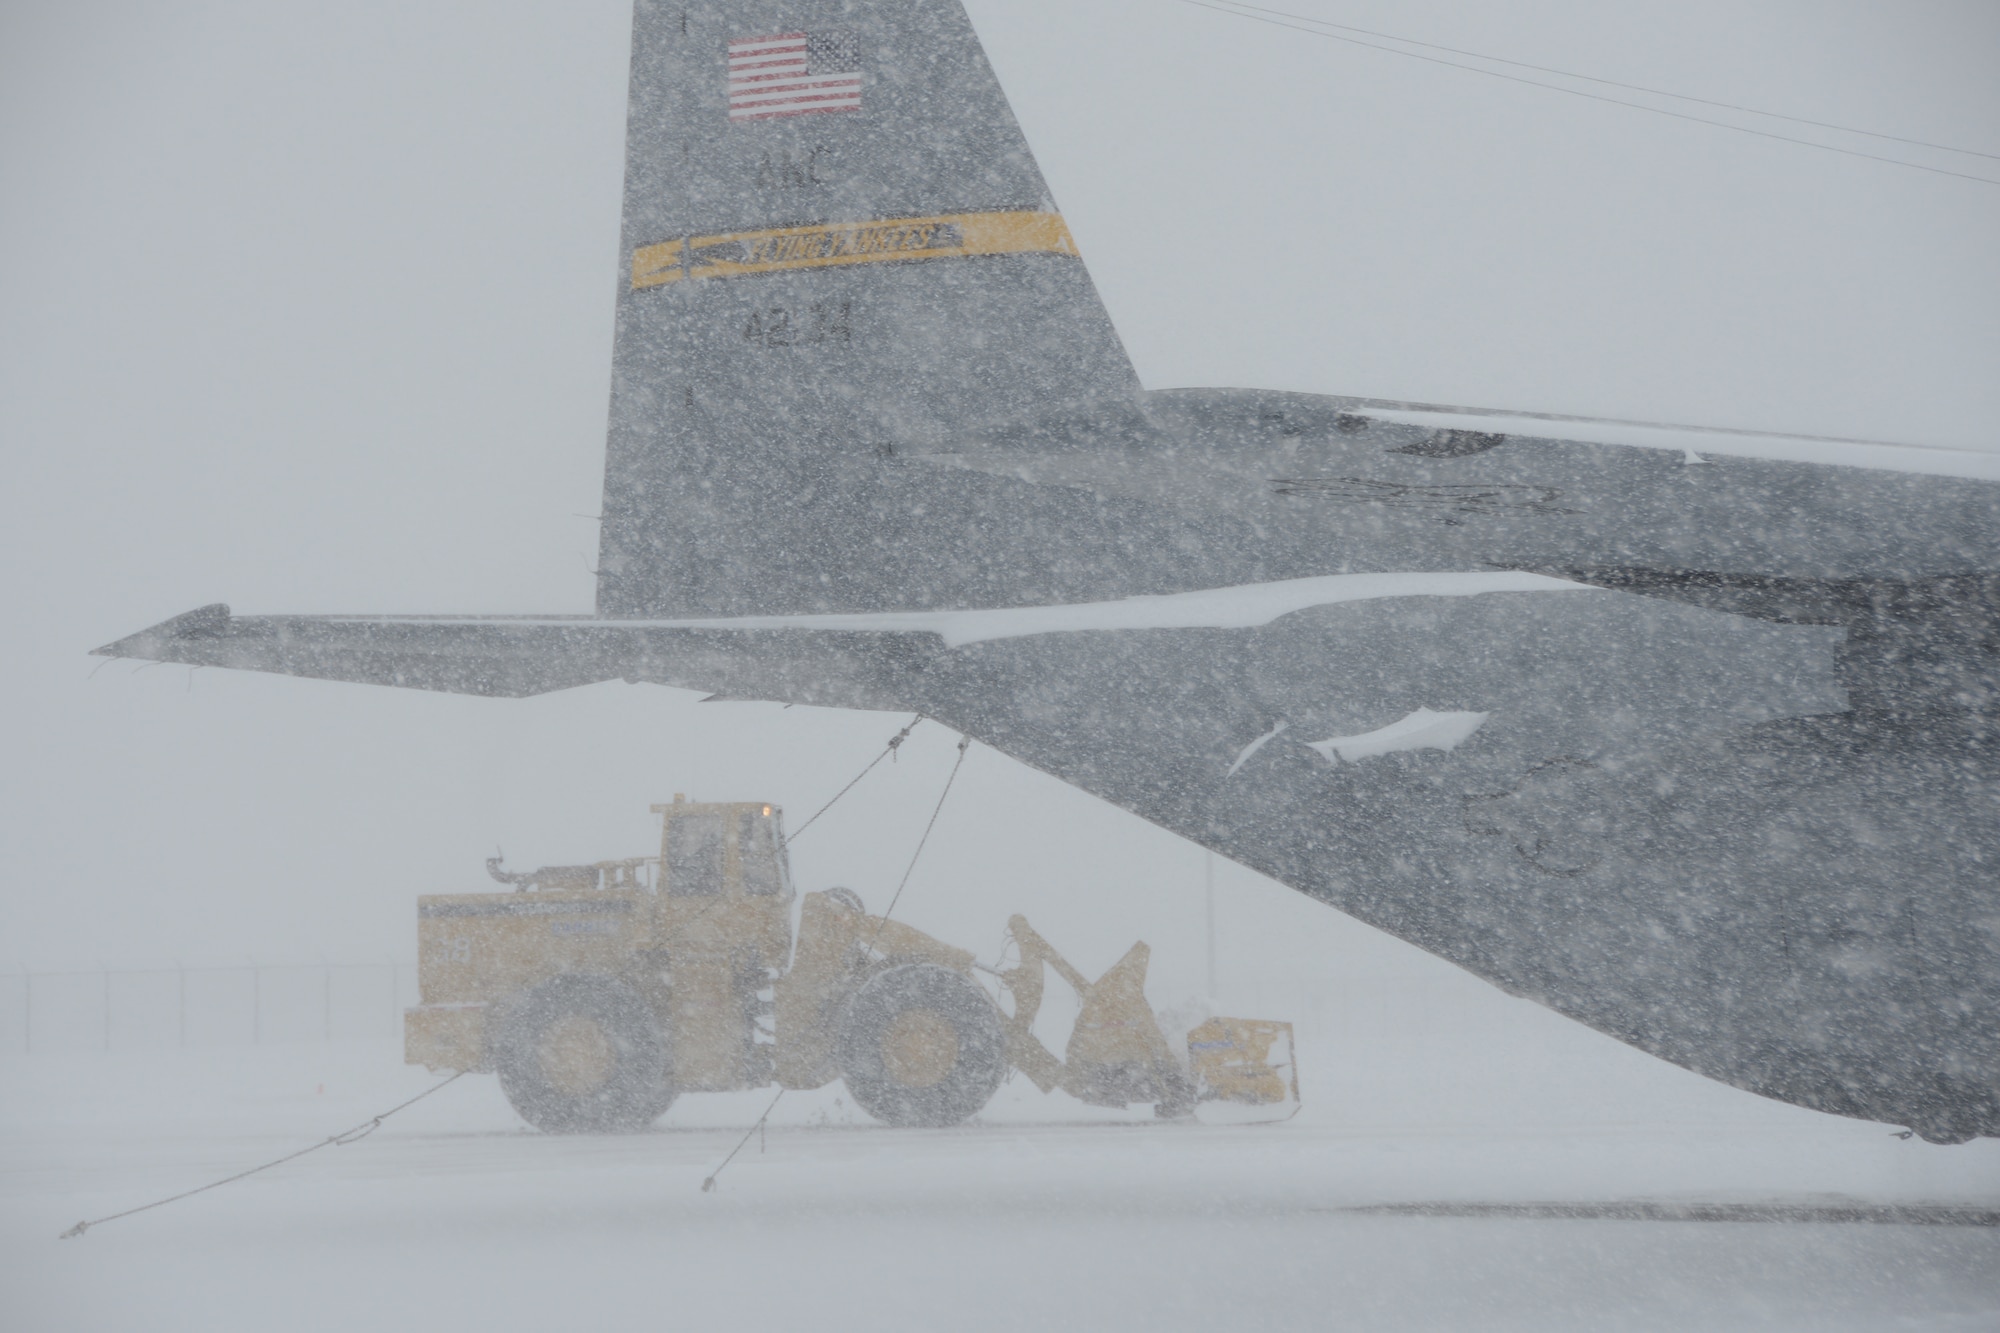 A C-130H aircraft assigned to the 103rd Airlift Wing parked at Bradley Air National Guard Base, East Granby, Conn., as a plow works to clear the flightline of the rapidly accumulating snow from a nor’easter Feb. 13, 2014. More than 200 Airmen reported to work here and at the Orange Air National Guard Station, ready to answer the call in the event the state required assistance during the height of the storm.  (U.S. Air National Guard photo by Maj. Bryon M. Turner)